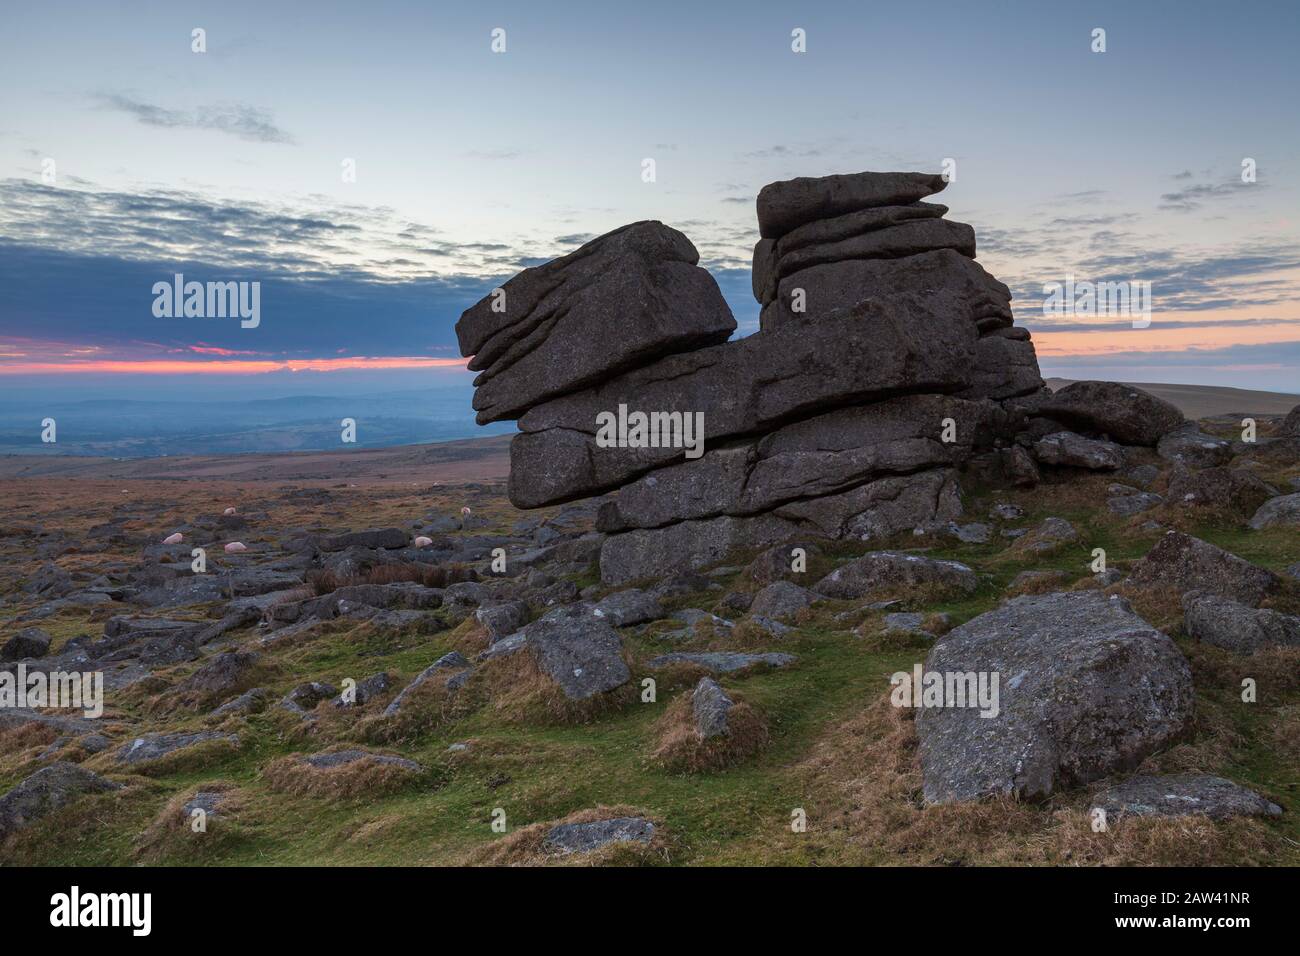 granite rock formation at Staple Tor, Dartmoor national park after sunset. Stock Photo